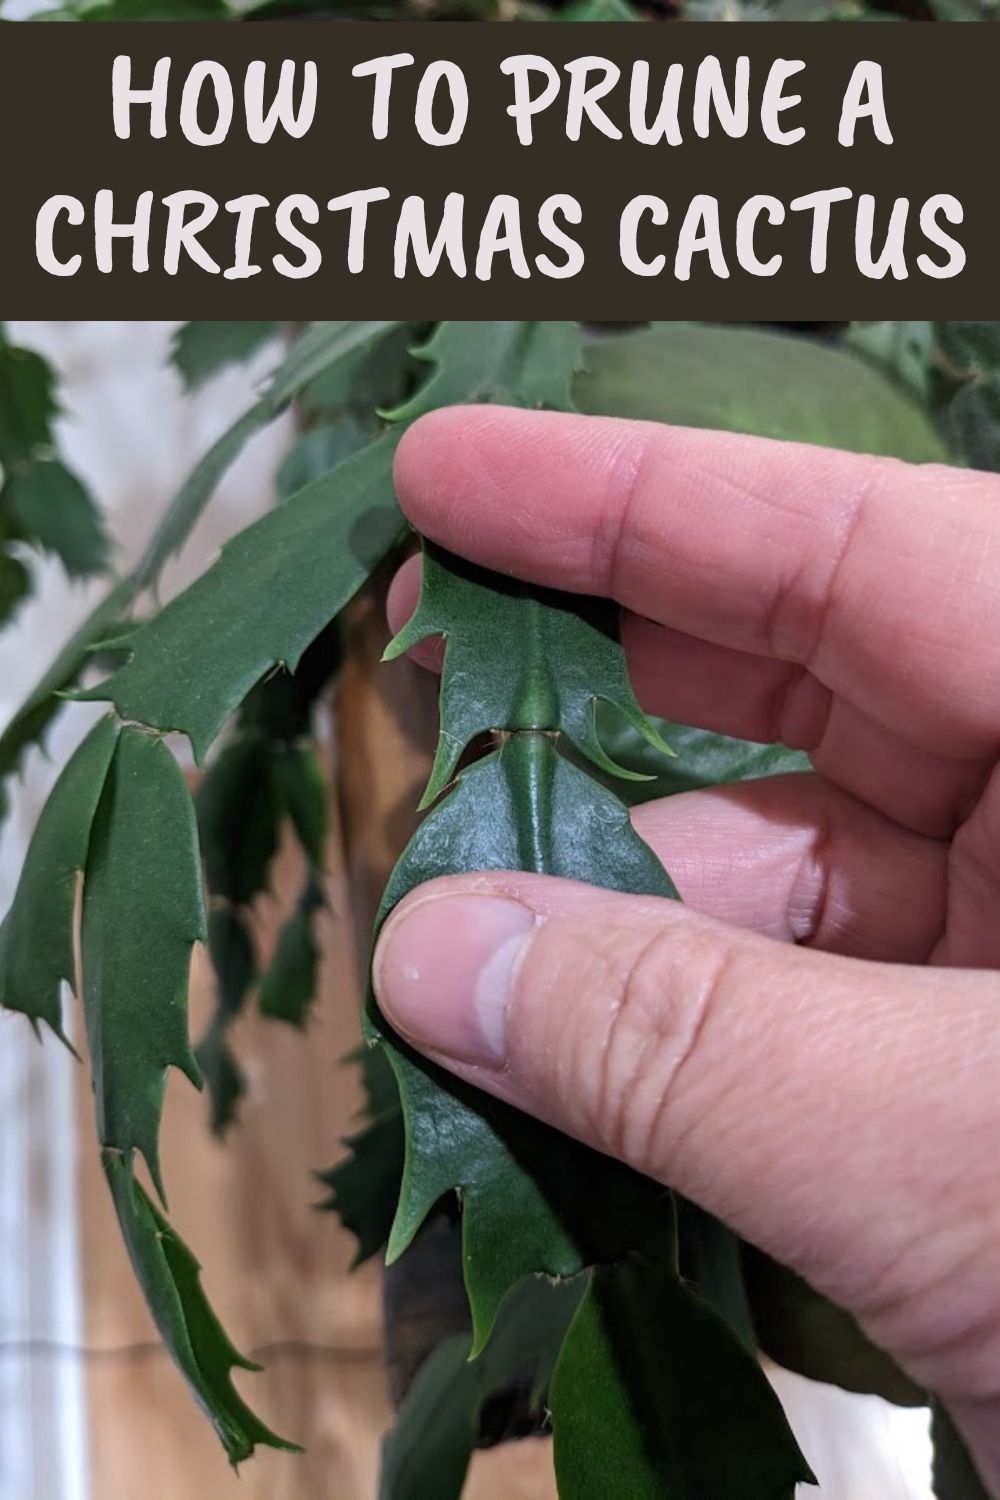 How to prune a Christmas cactus.